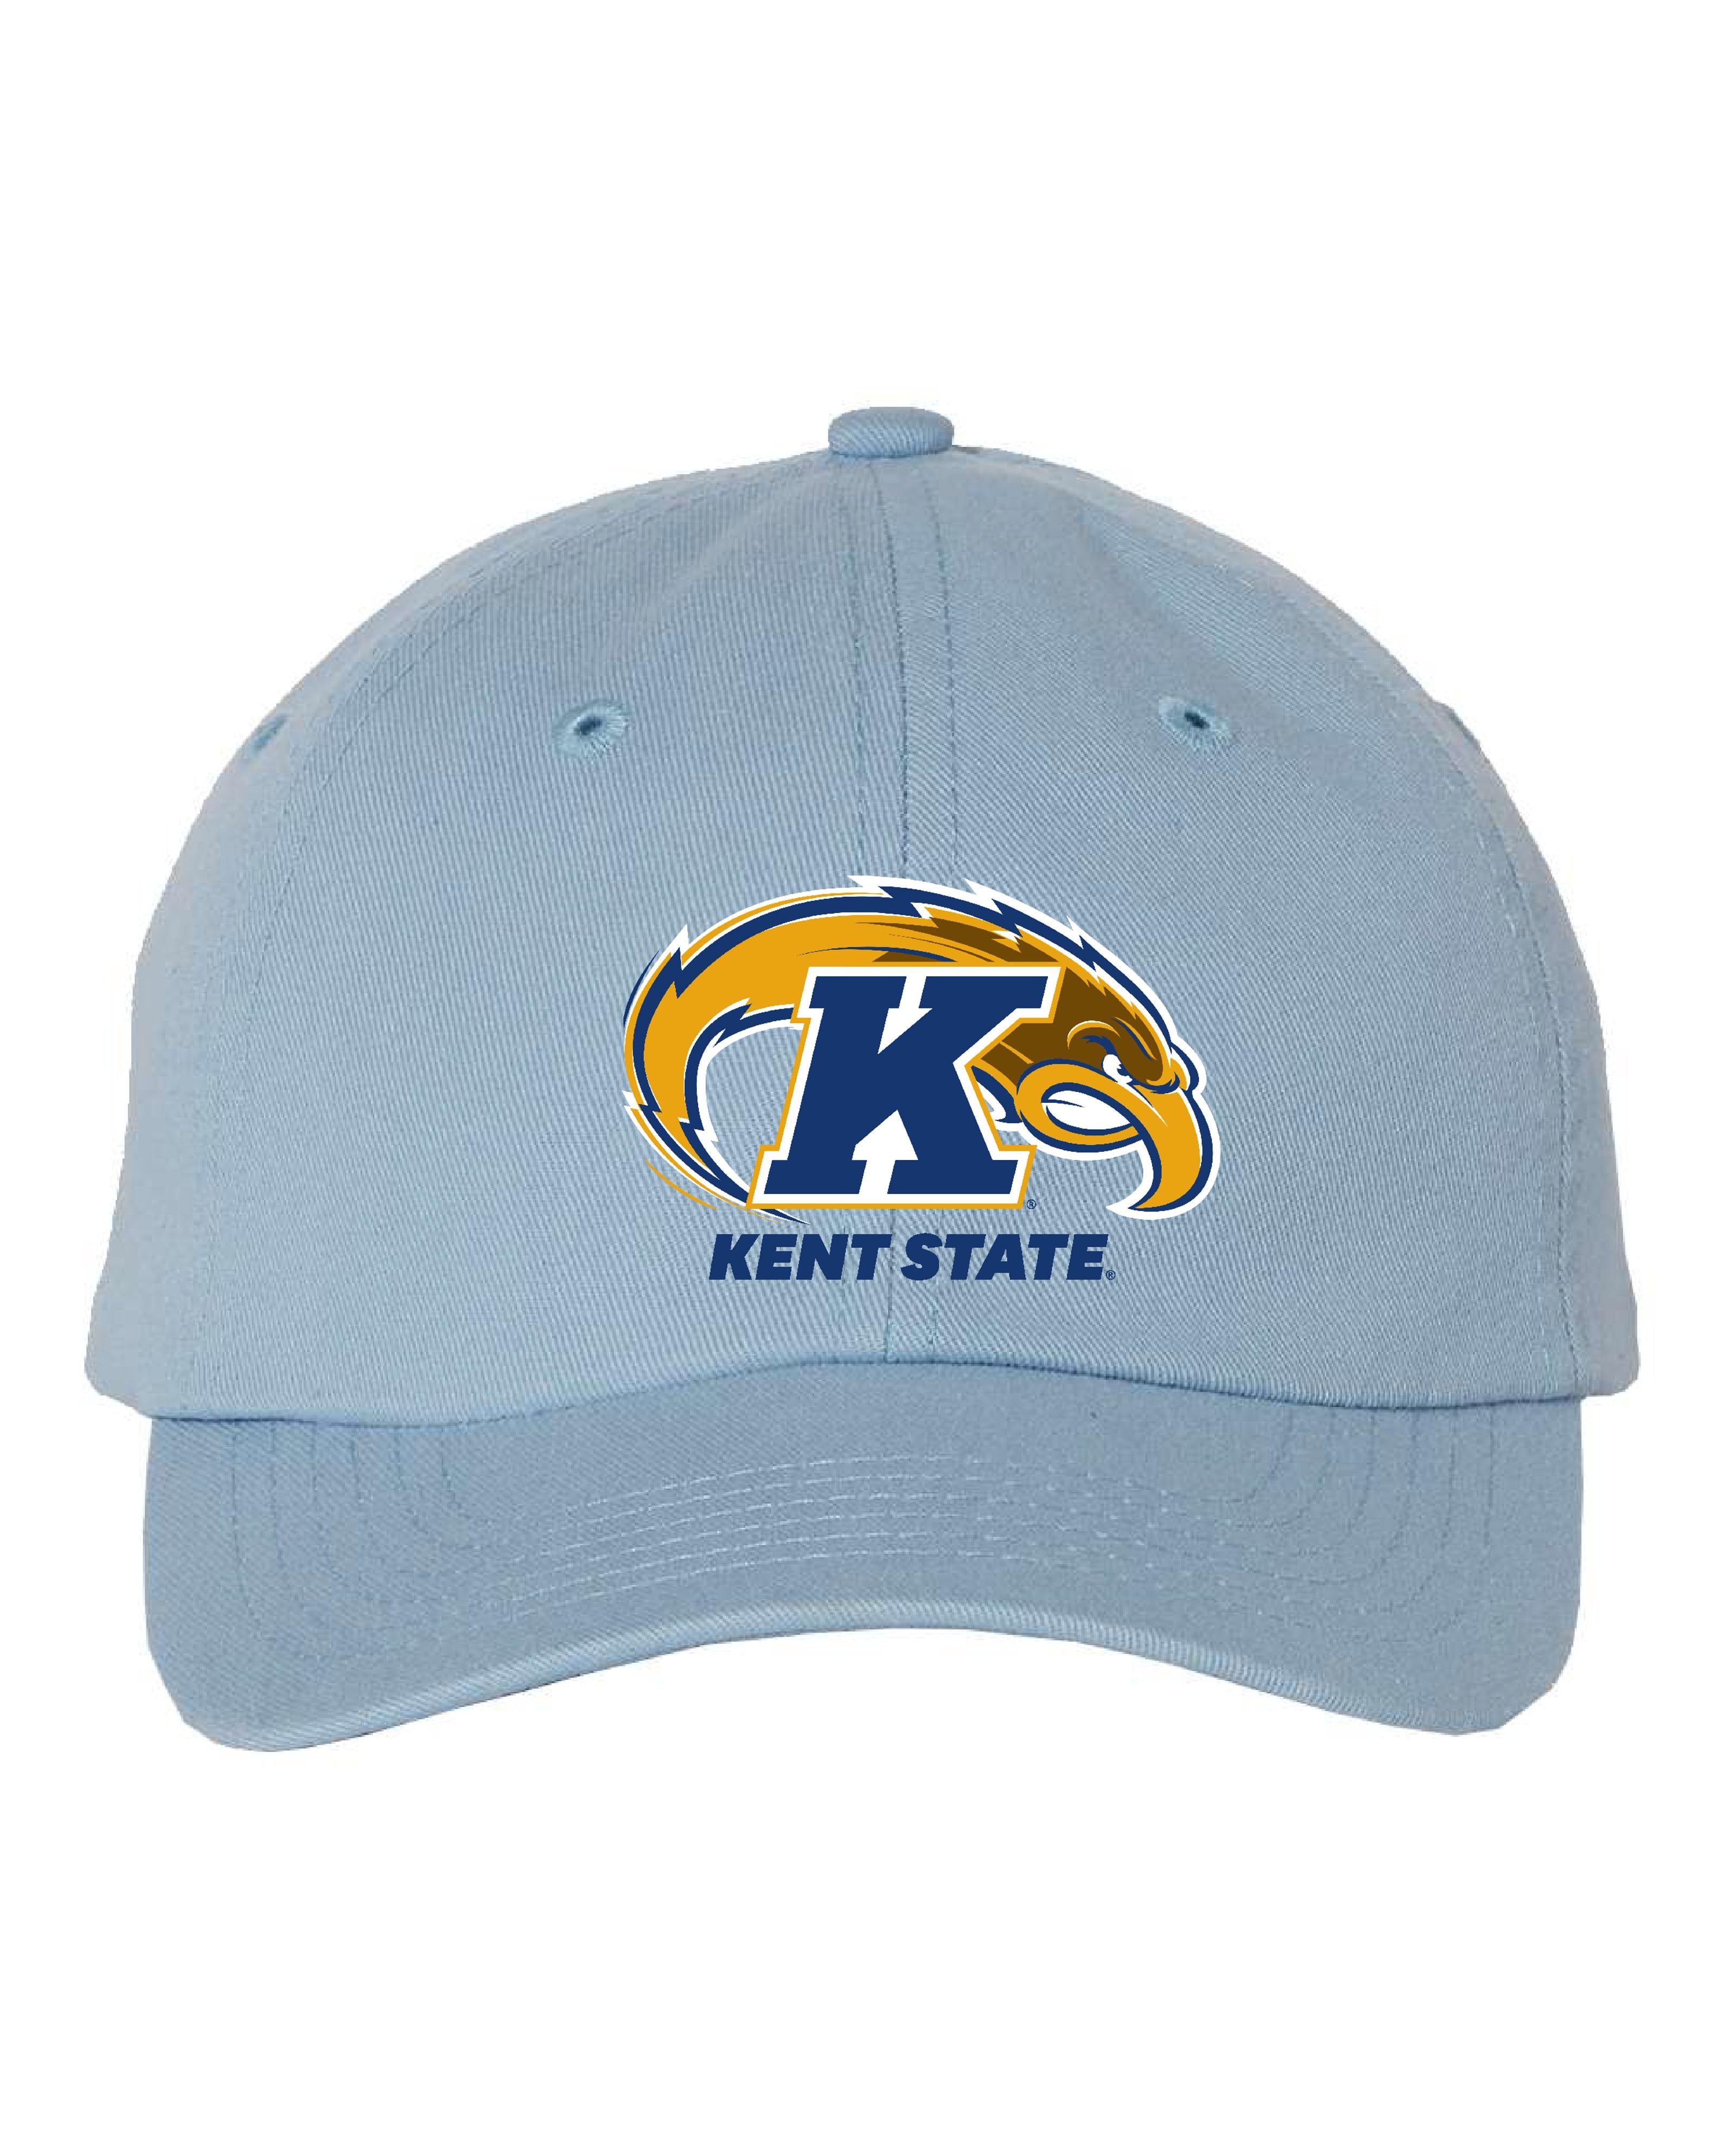 Kent State Light Blue Golden Flashes Unstructured Adjustable Youth Hat